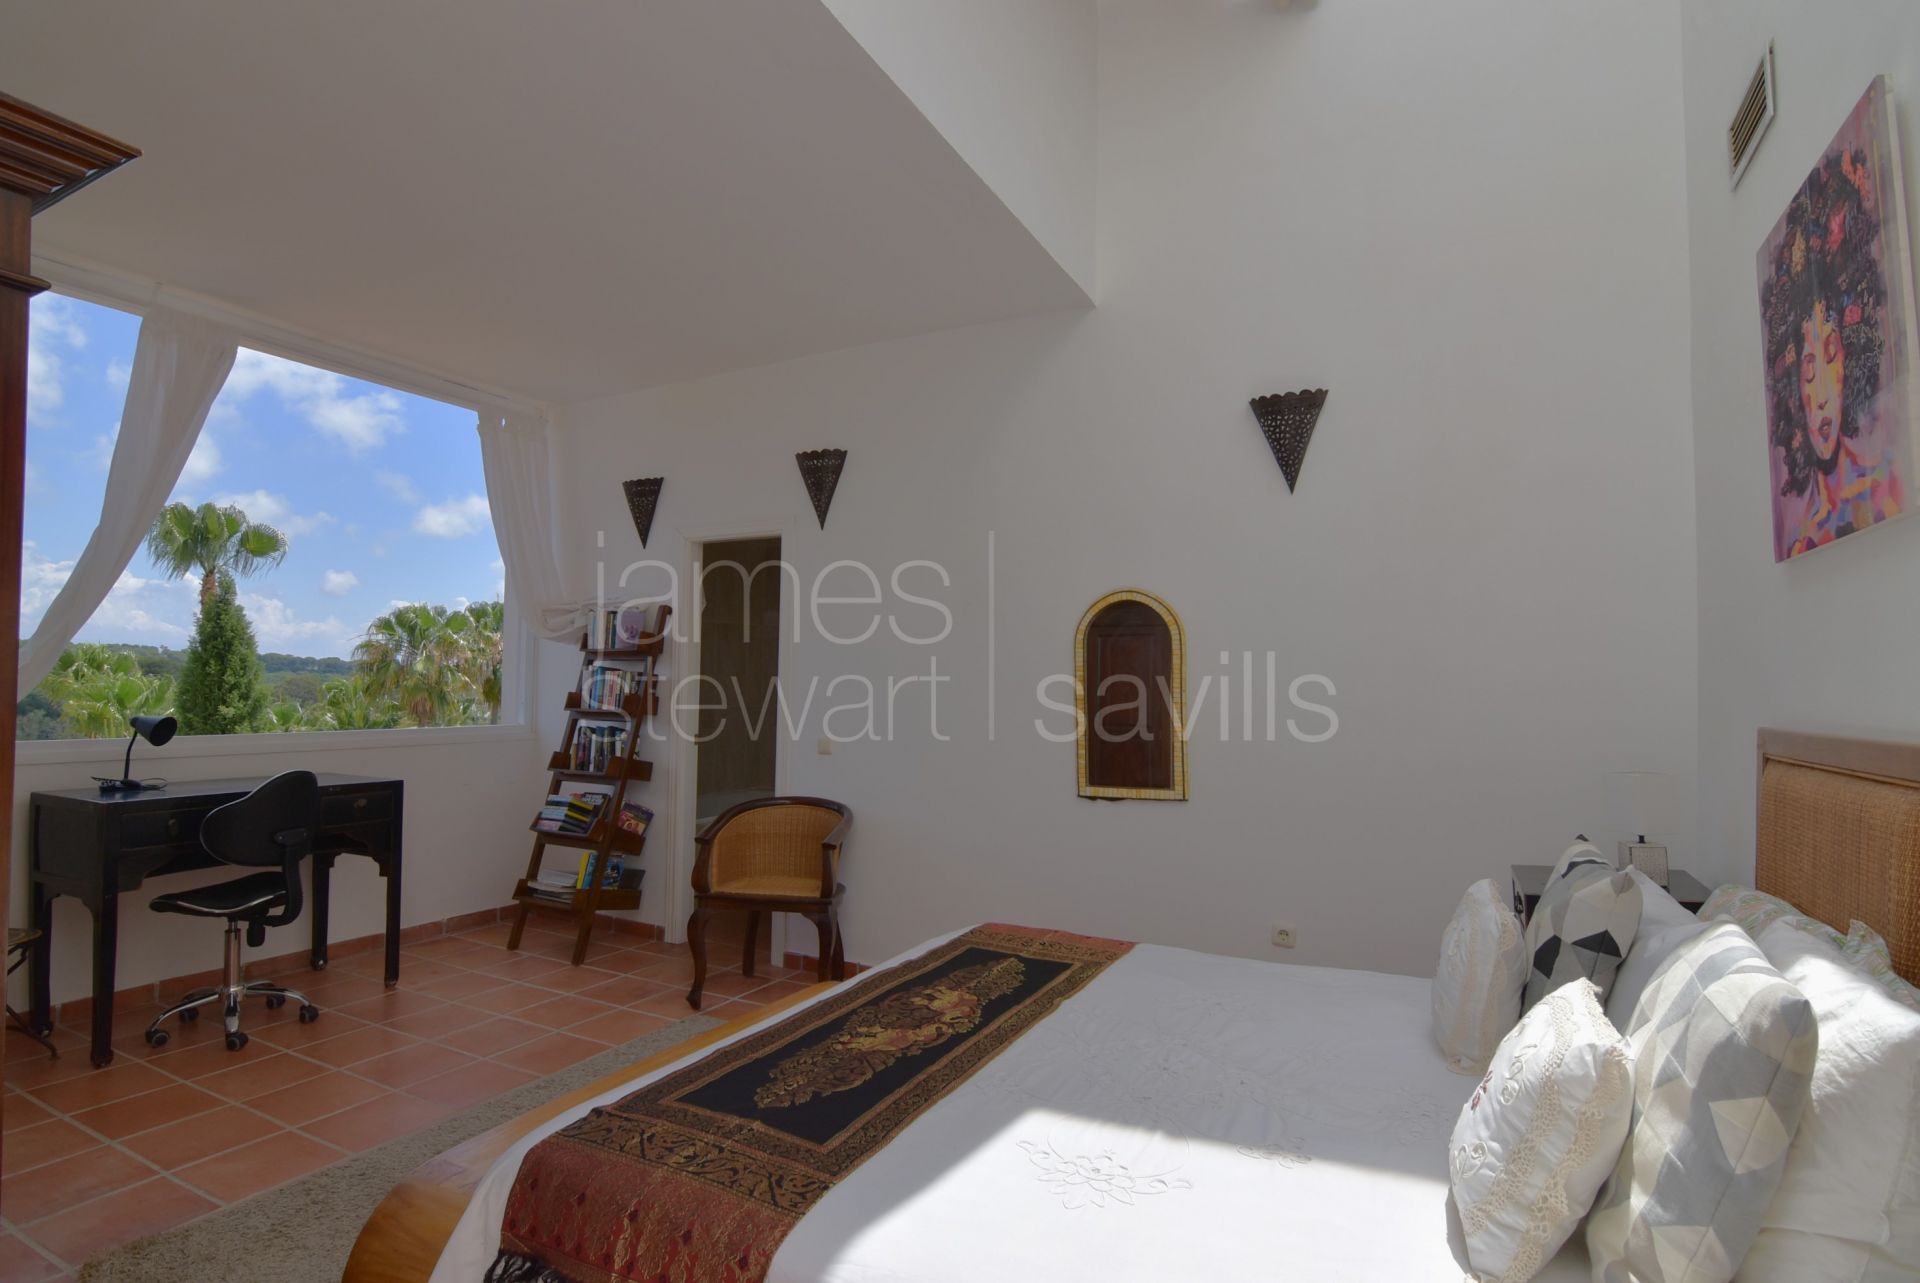 Great family home with elevated views overlooking Sotogrande and the surrounding countryside